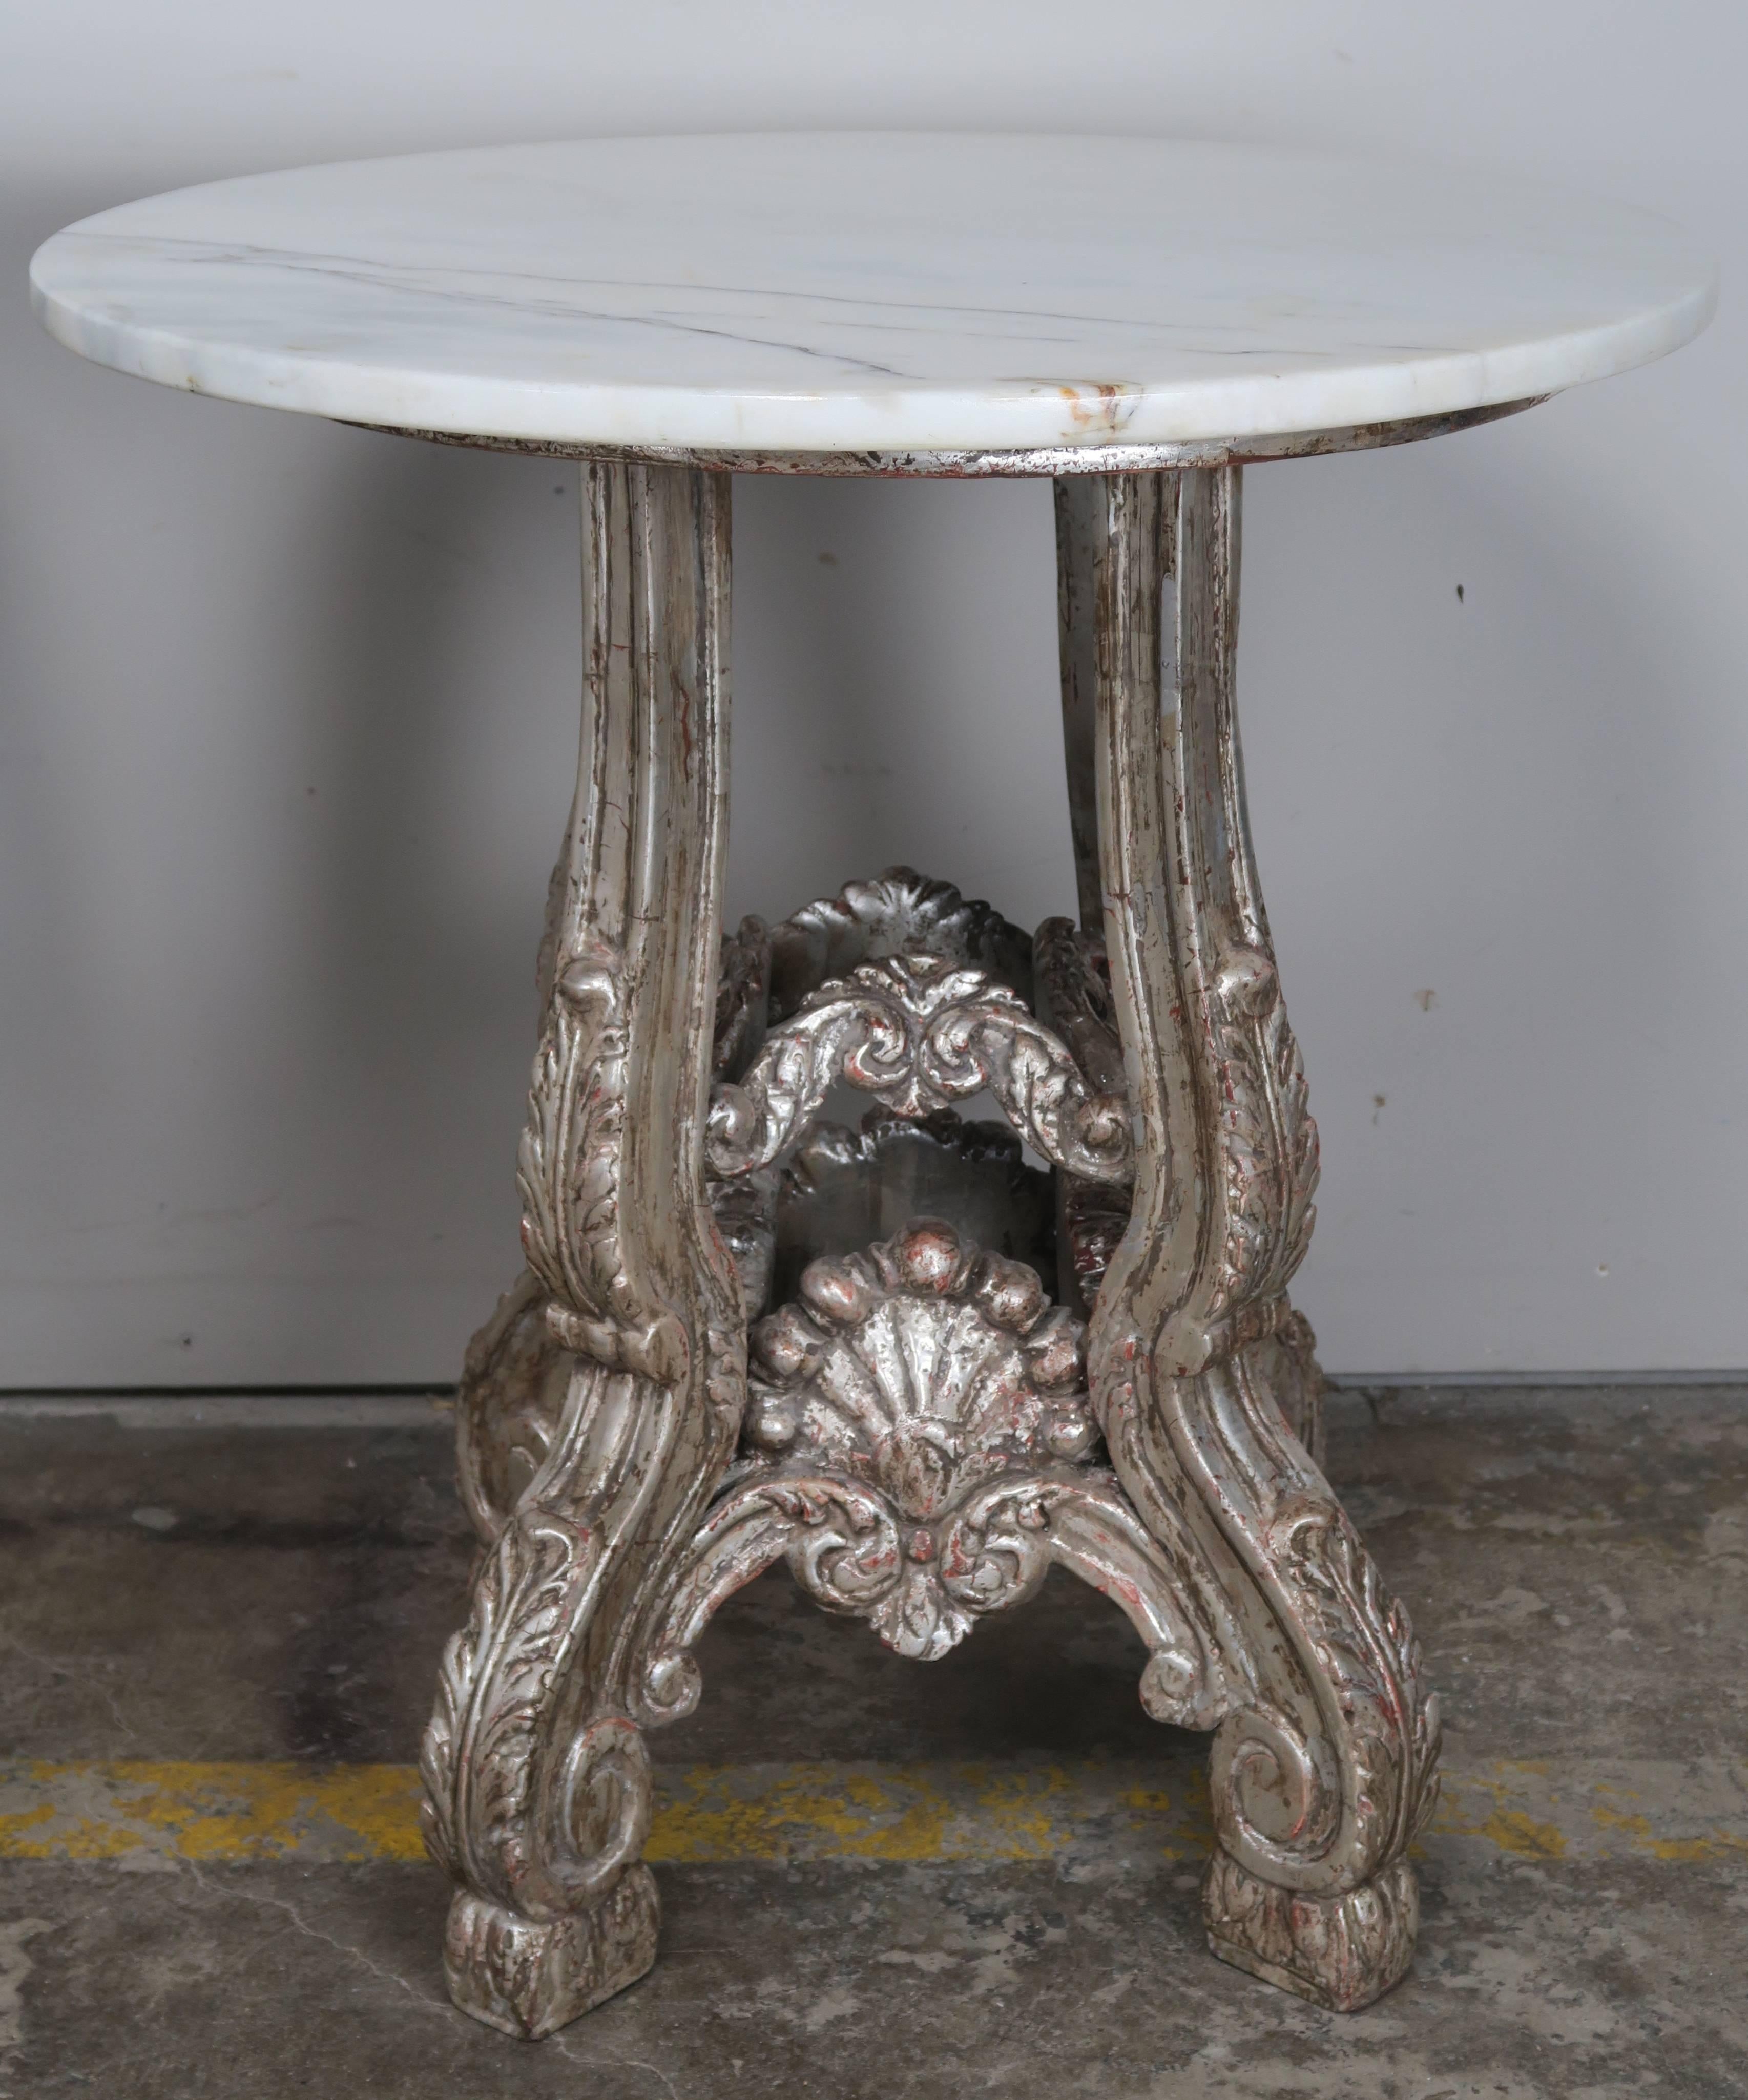 Pair of 1930s French silver leaf carved wood tables standing on four legs with acanthus leaf and scrolled details. Carved shells on all four sides. Carrara marble tops.